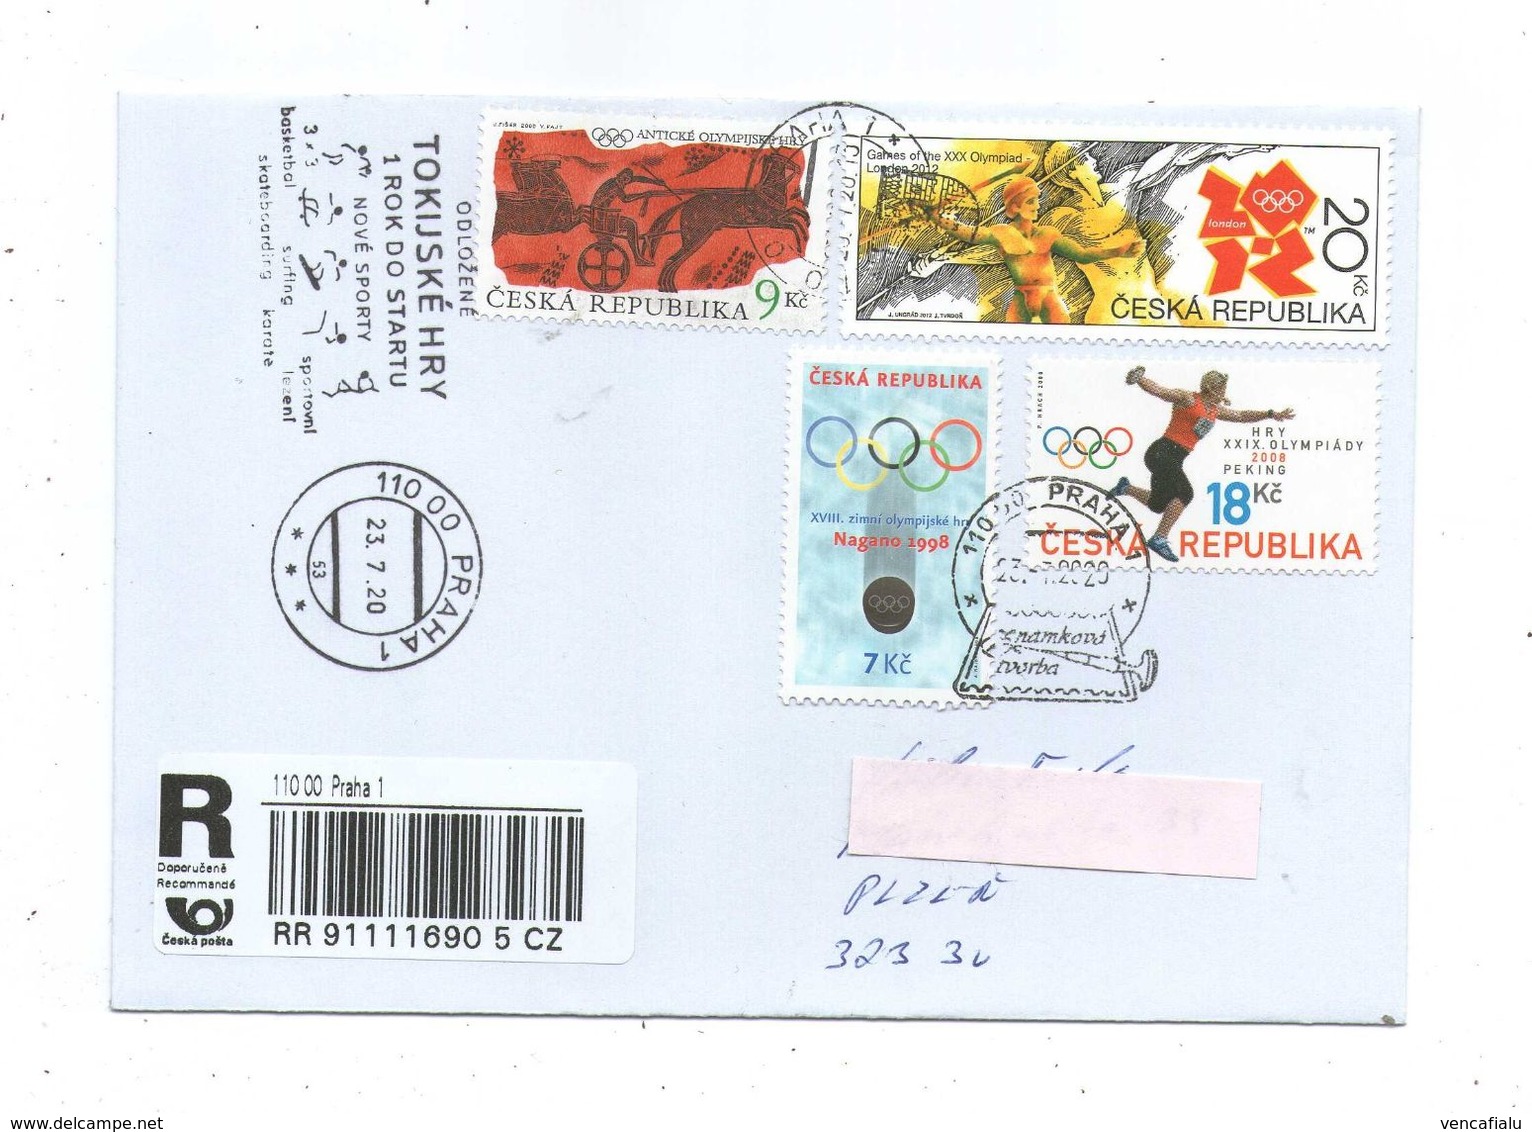 Czech Republic 2020 - Moving The Deadline By One Year, Special Postmark, Postage Registered Used, Nice Stamps - Verano 2020 : Tokio